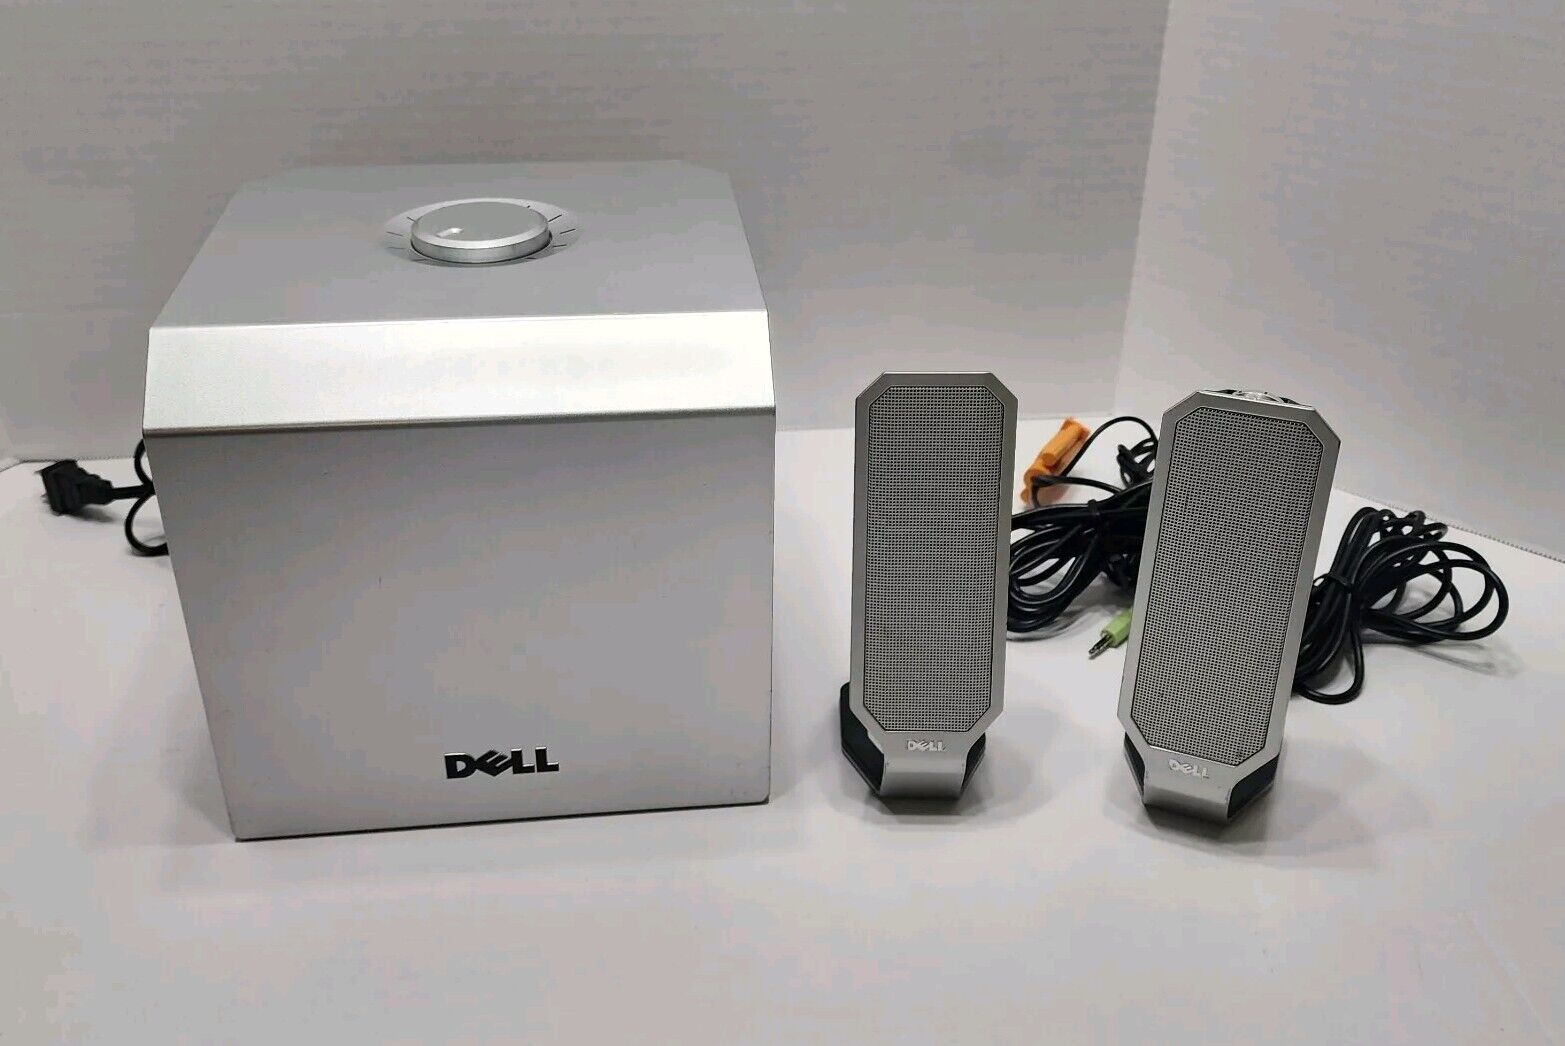 DELL ZYLUX A525 SUBWOOFER AND COMPUTER SPEAKERS WIRED PC - TESTED & WORKING